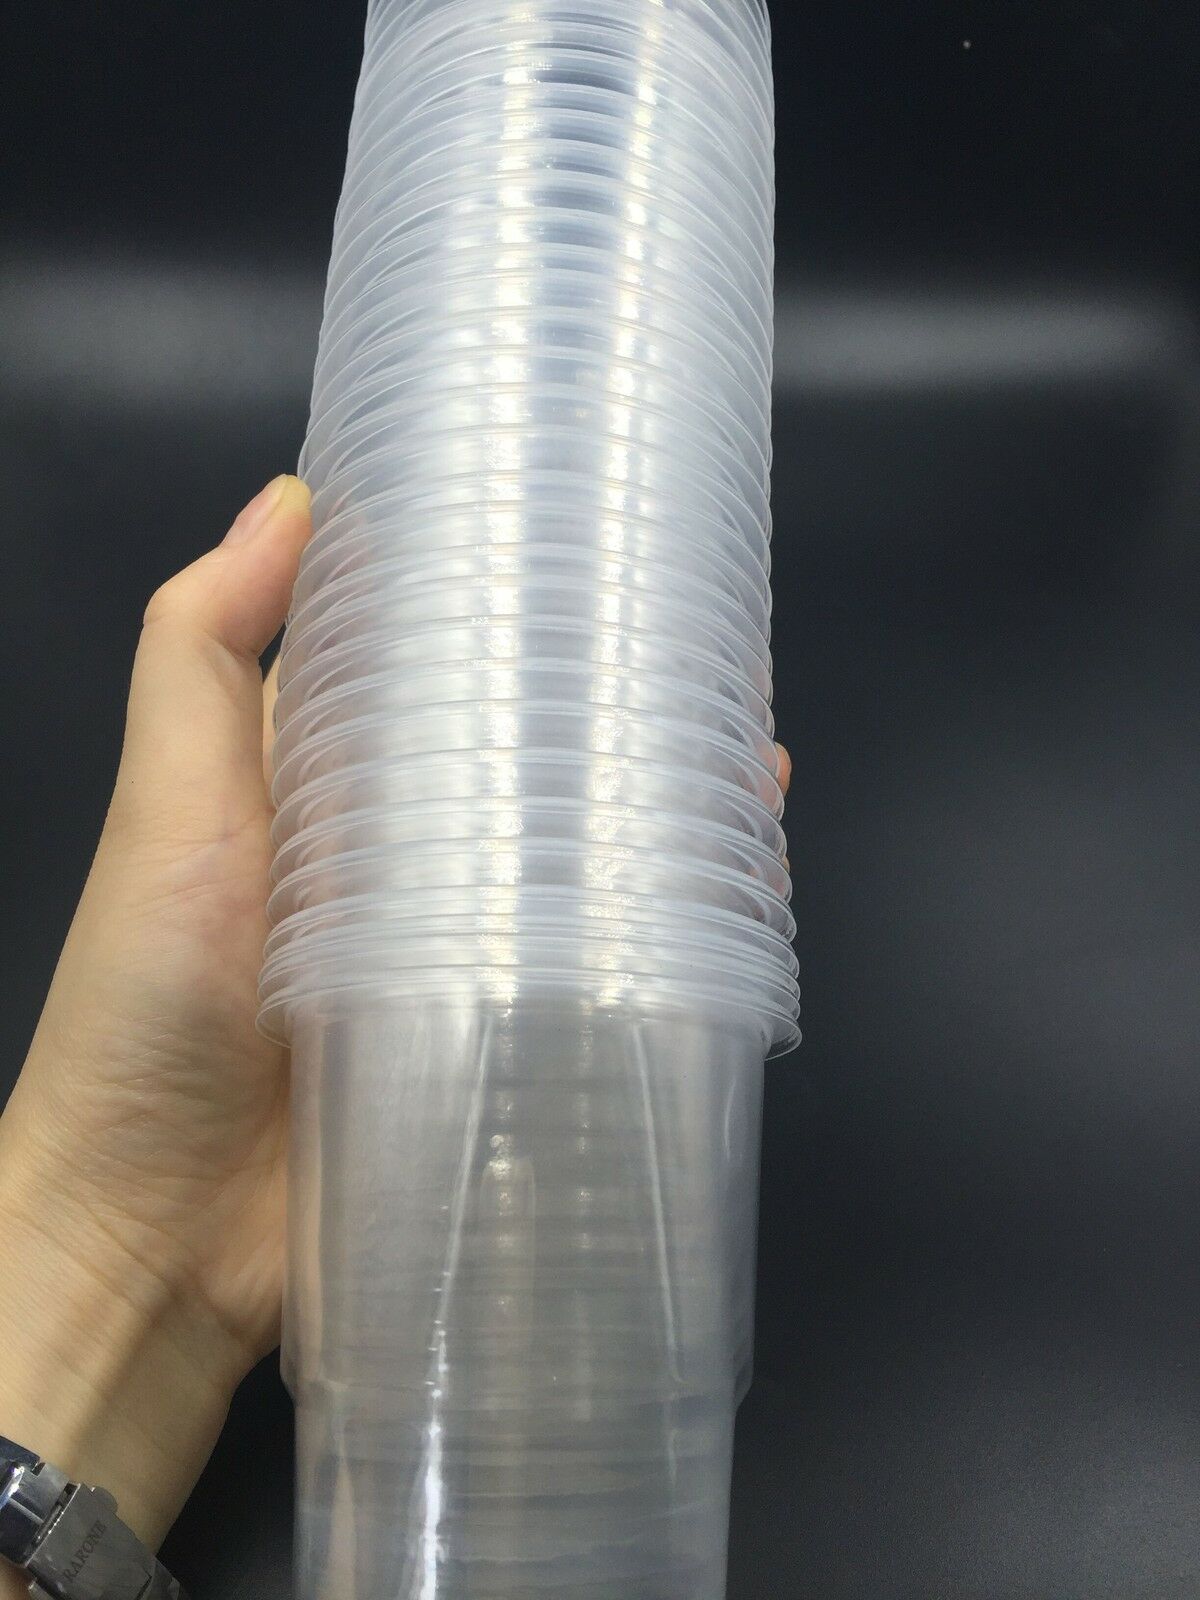 50x Plastic Clear Drinking Cups Disposable Reusable Strong Cup Party Bulk 250ml